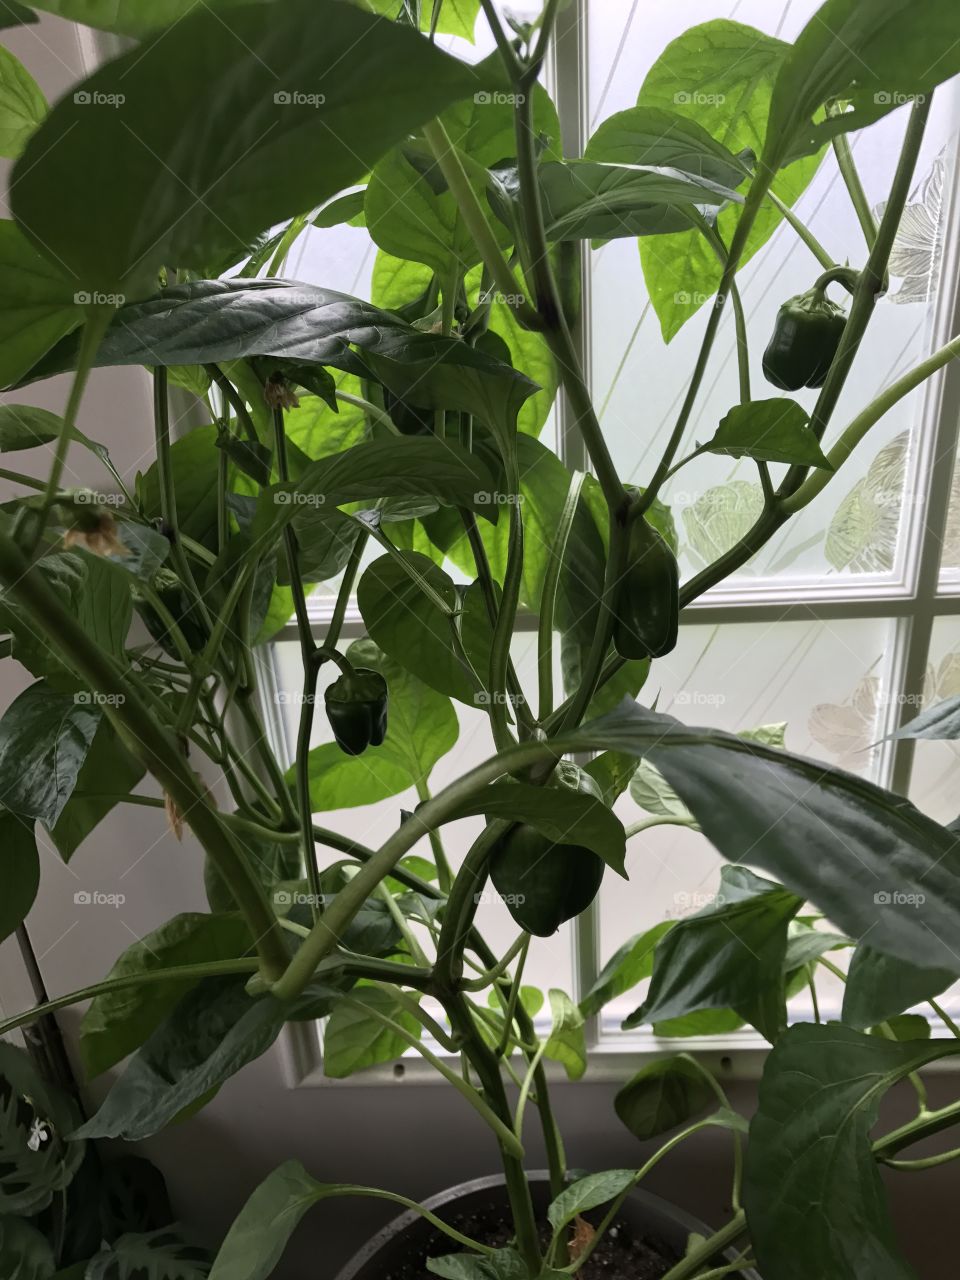 Peppers on the rise